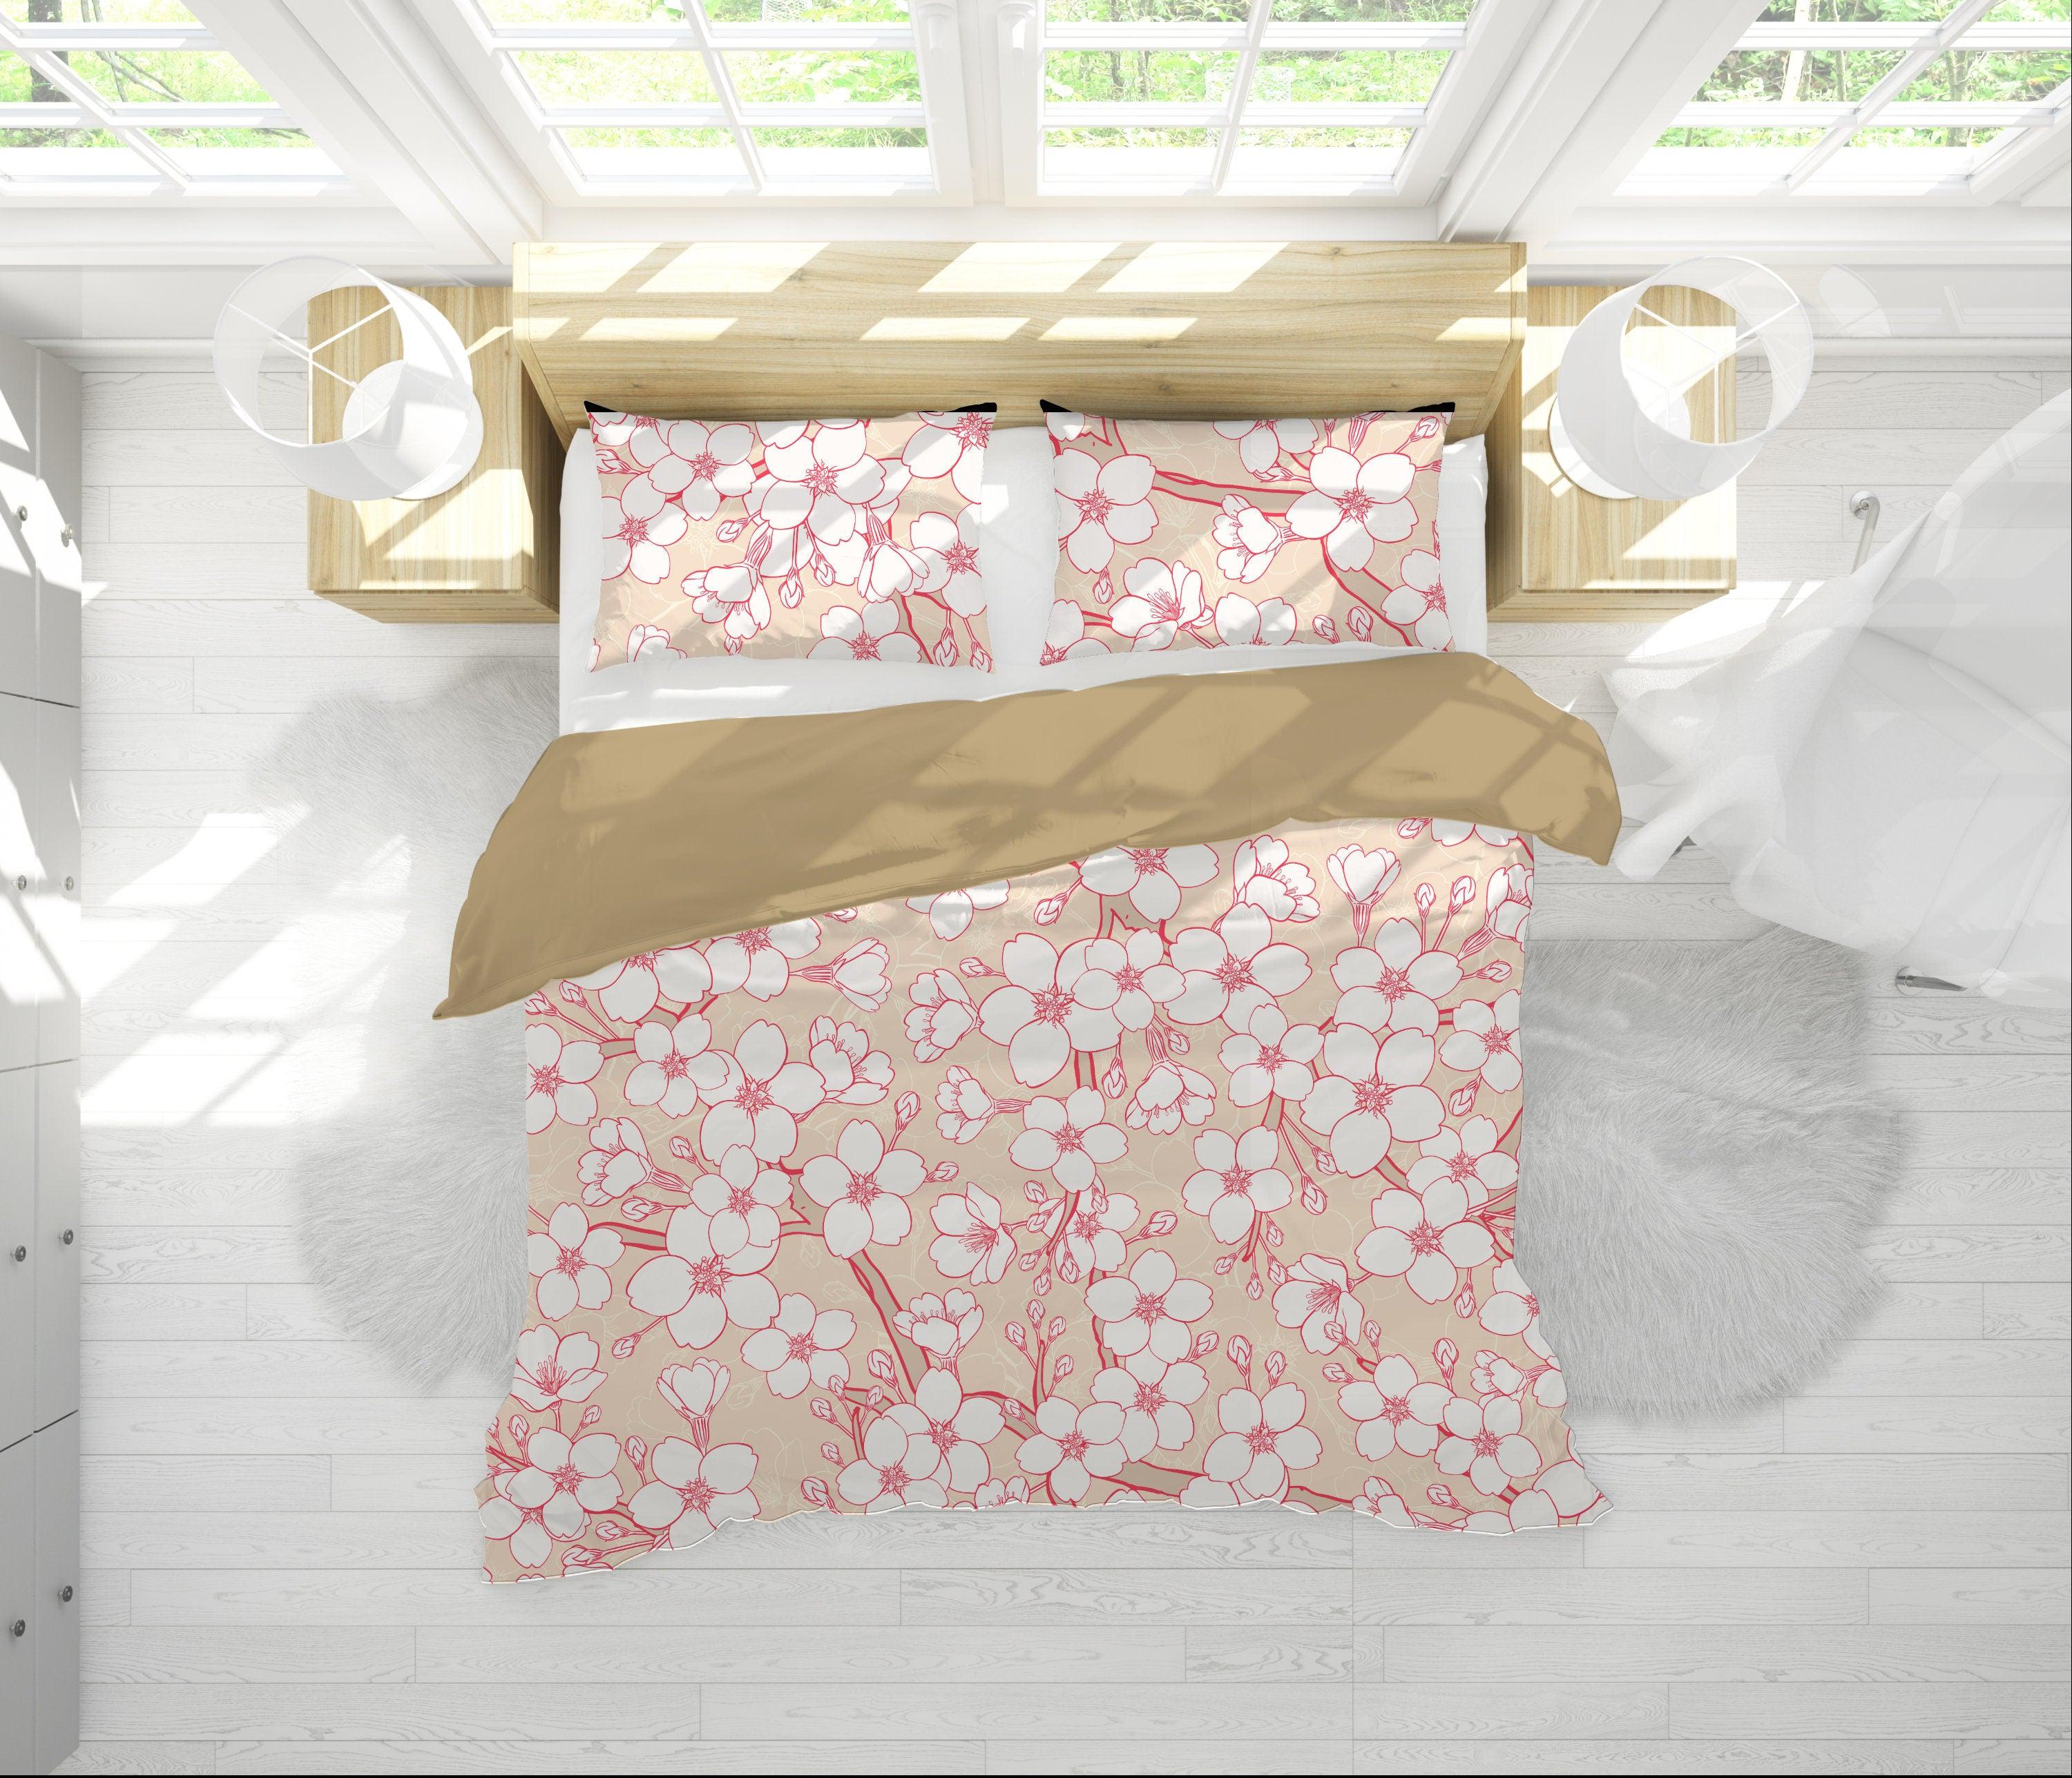 daintyduvet Cream Beige Bedding Set with Floral Prints | Cherry Blossoms Duvet Cover Set with Pillows